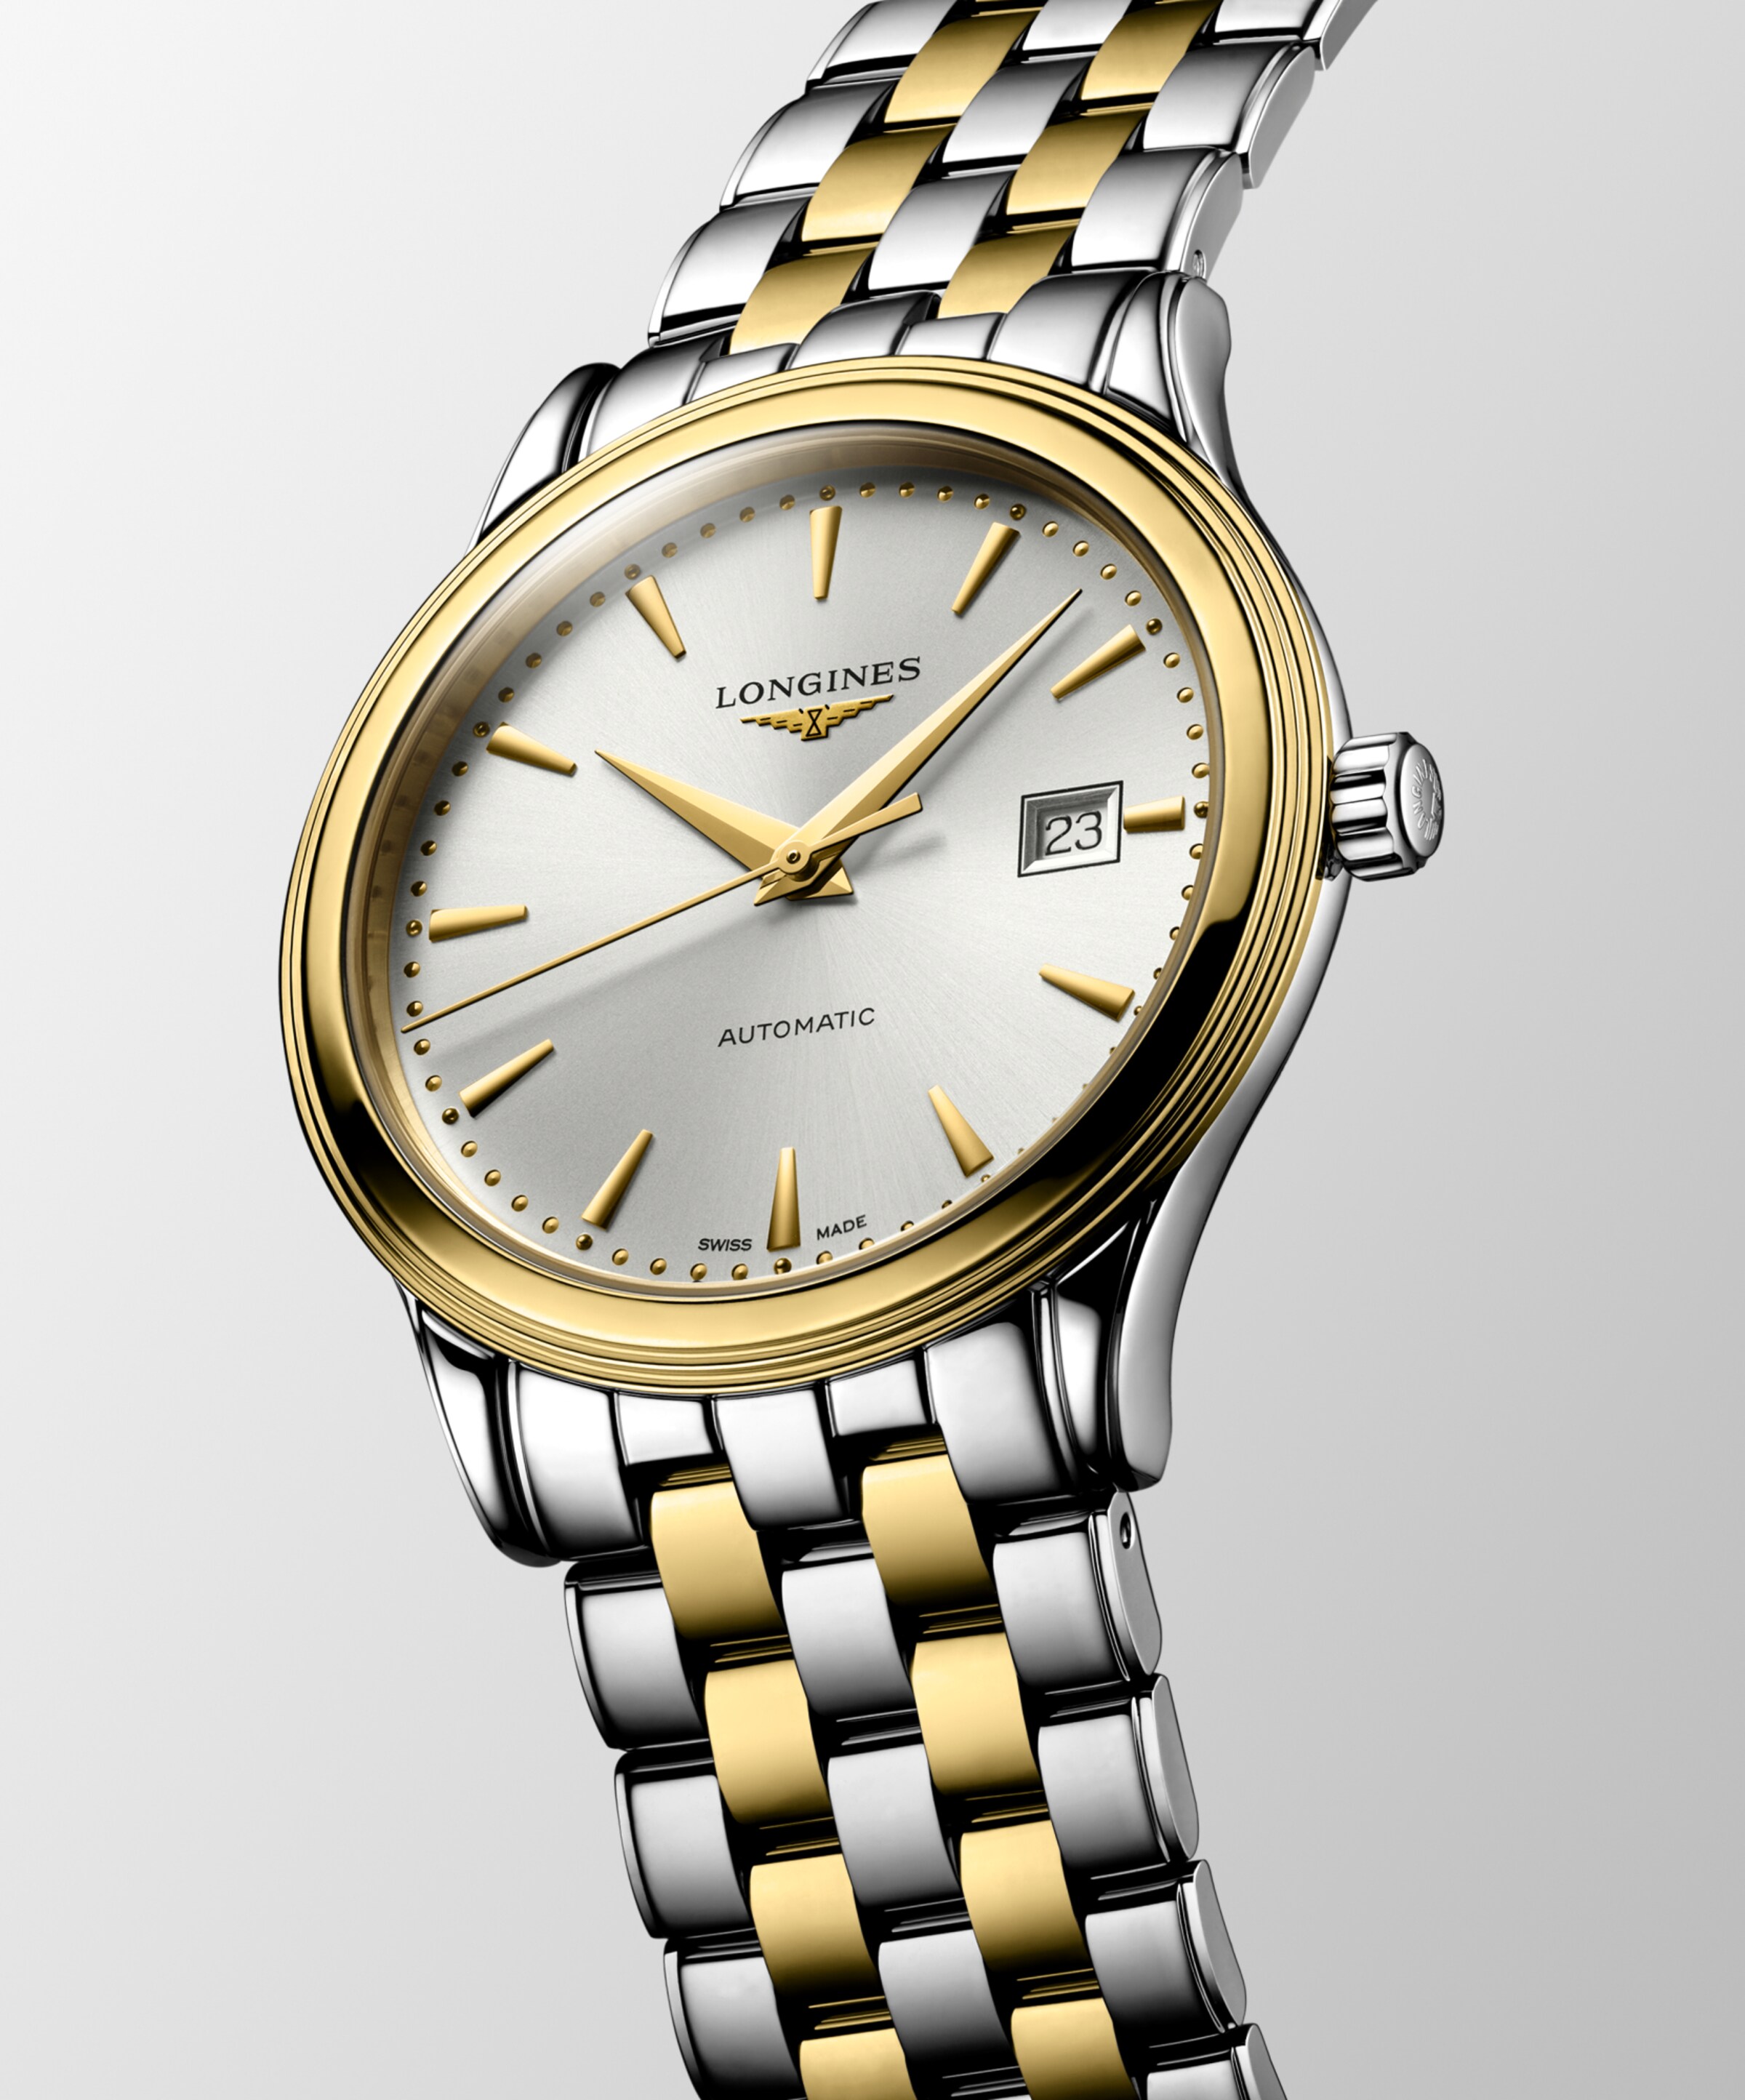 Longines FLAGSHIP Automatic Stainless steel and yellow PVD coating Watch - L4.984.3.79.7